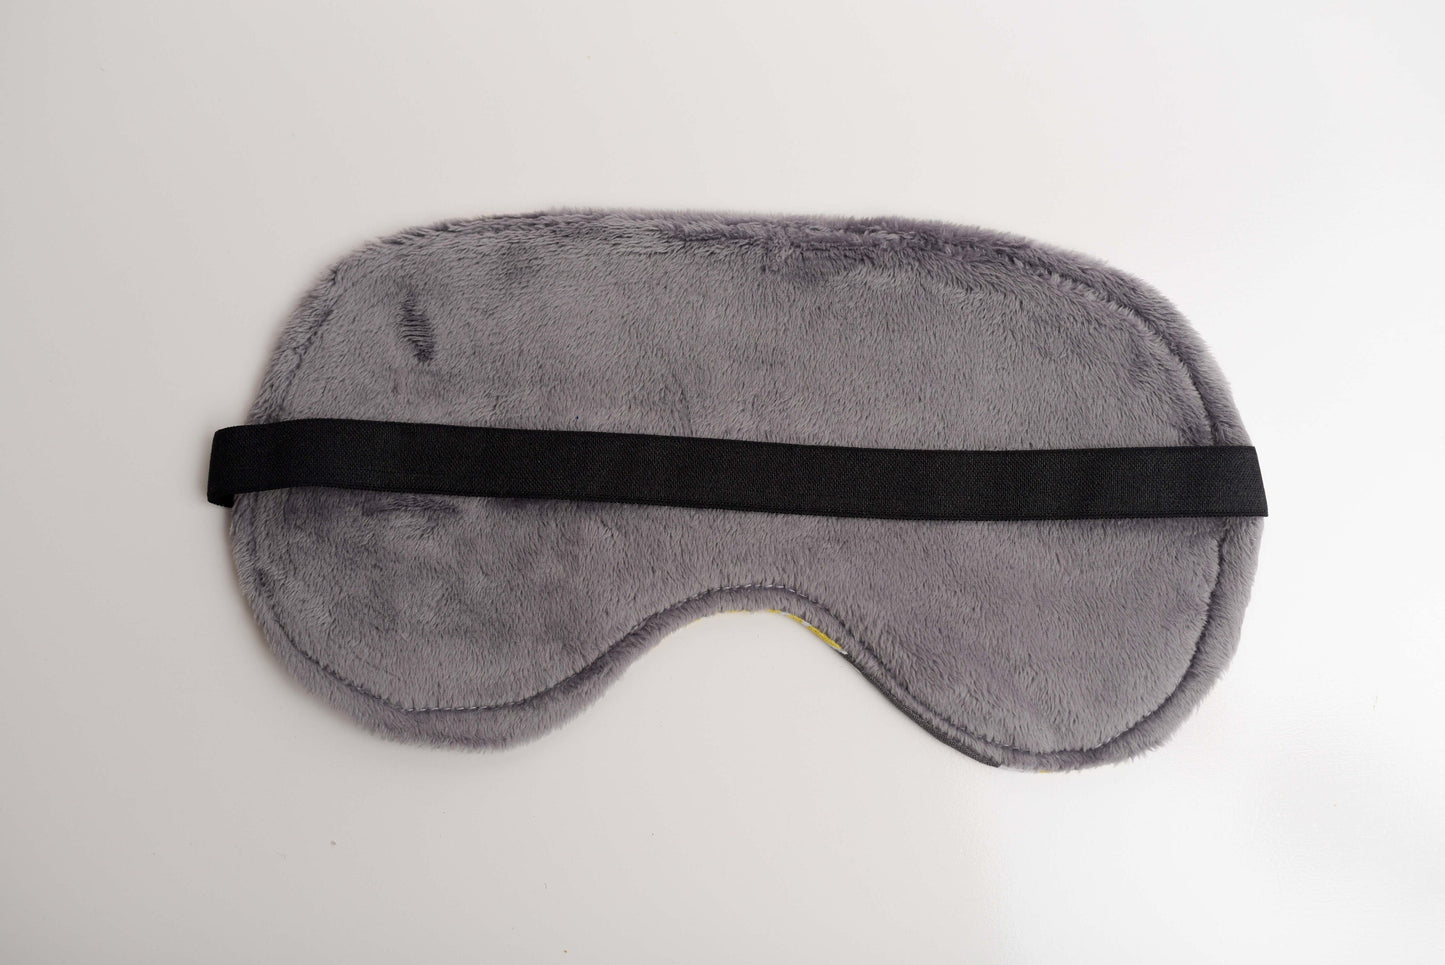 Gray and Yellow Floral Sleep Mask with Soft Minky Backing